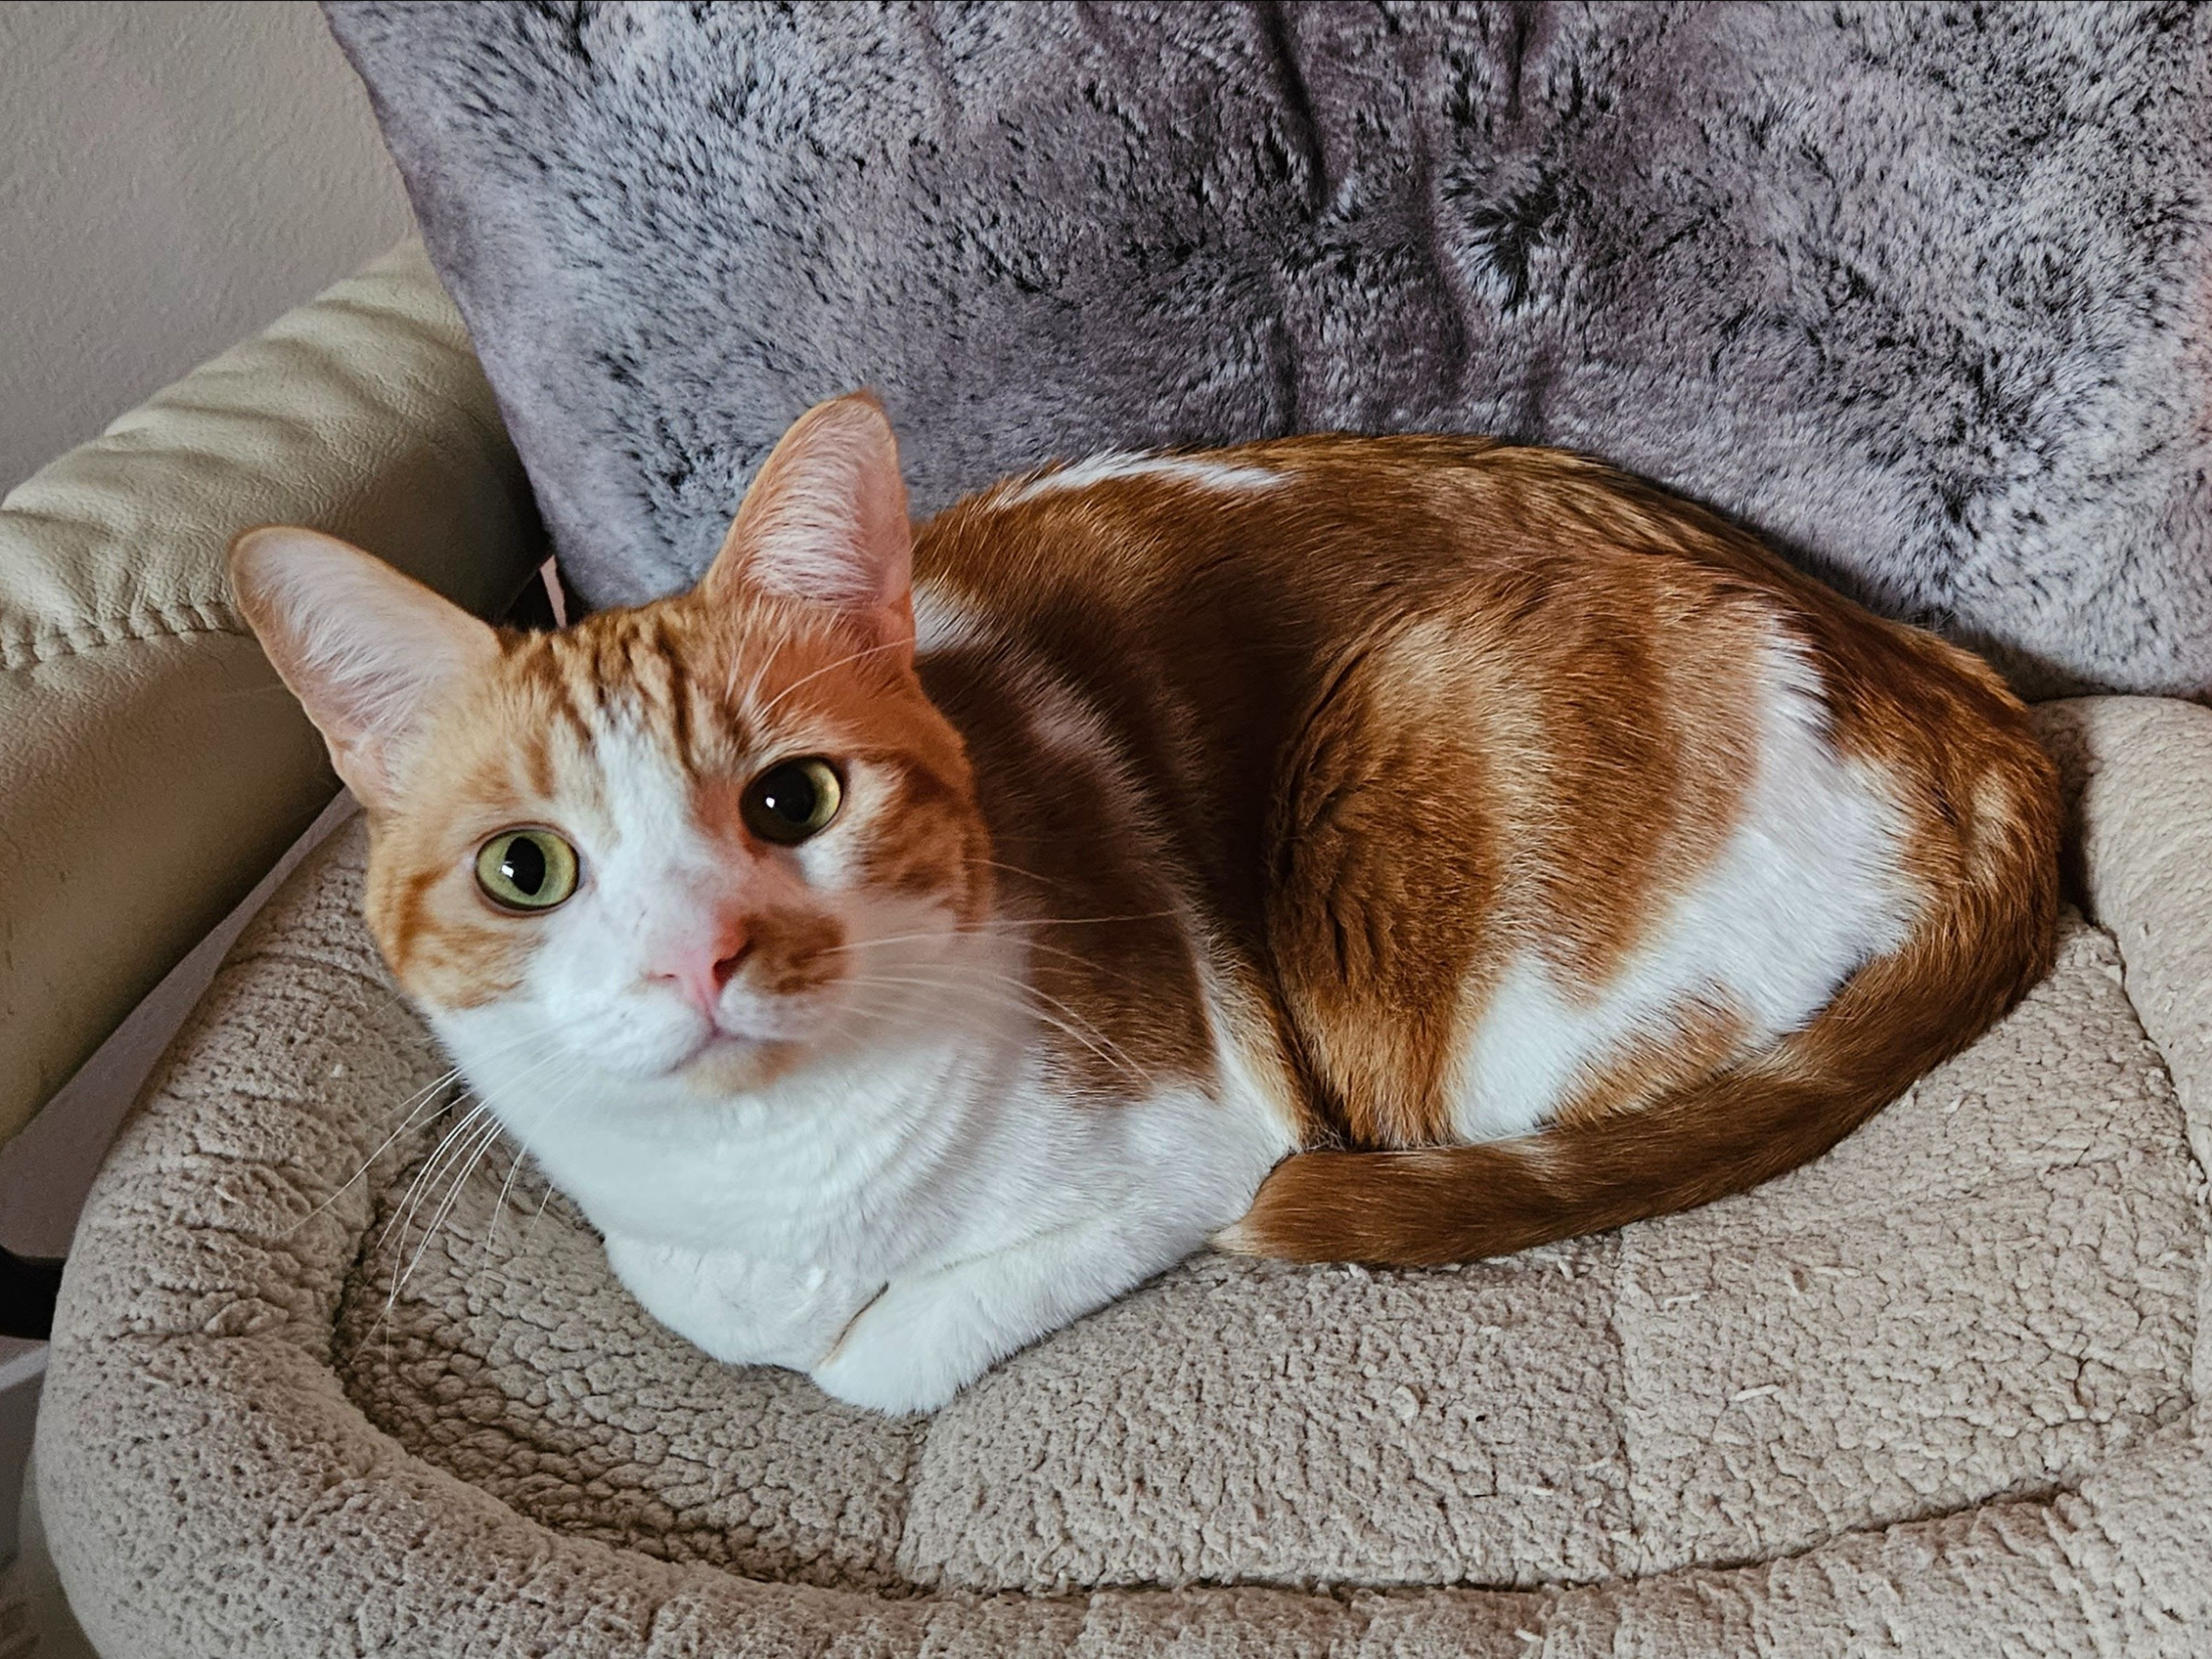 Tuna the cat is sitting on a cozy chair and staring straight at the camera.